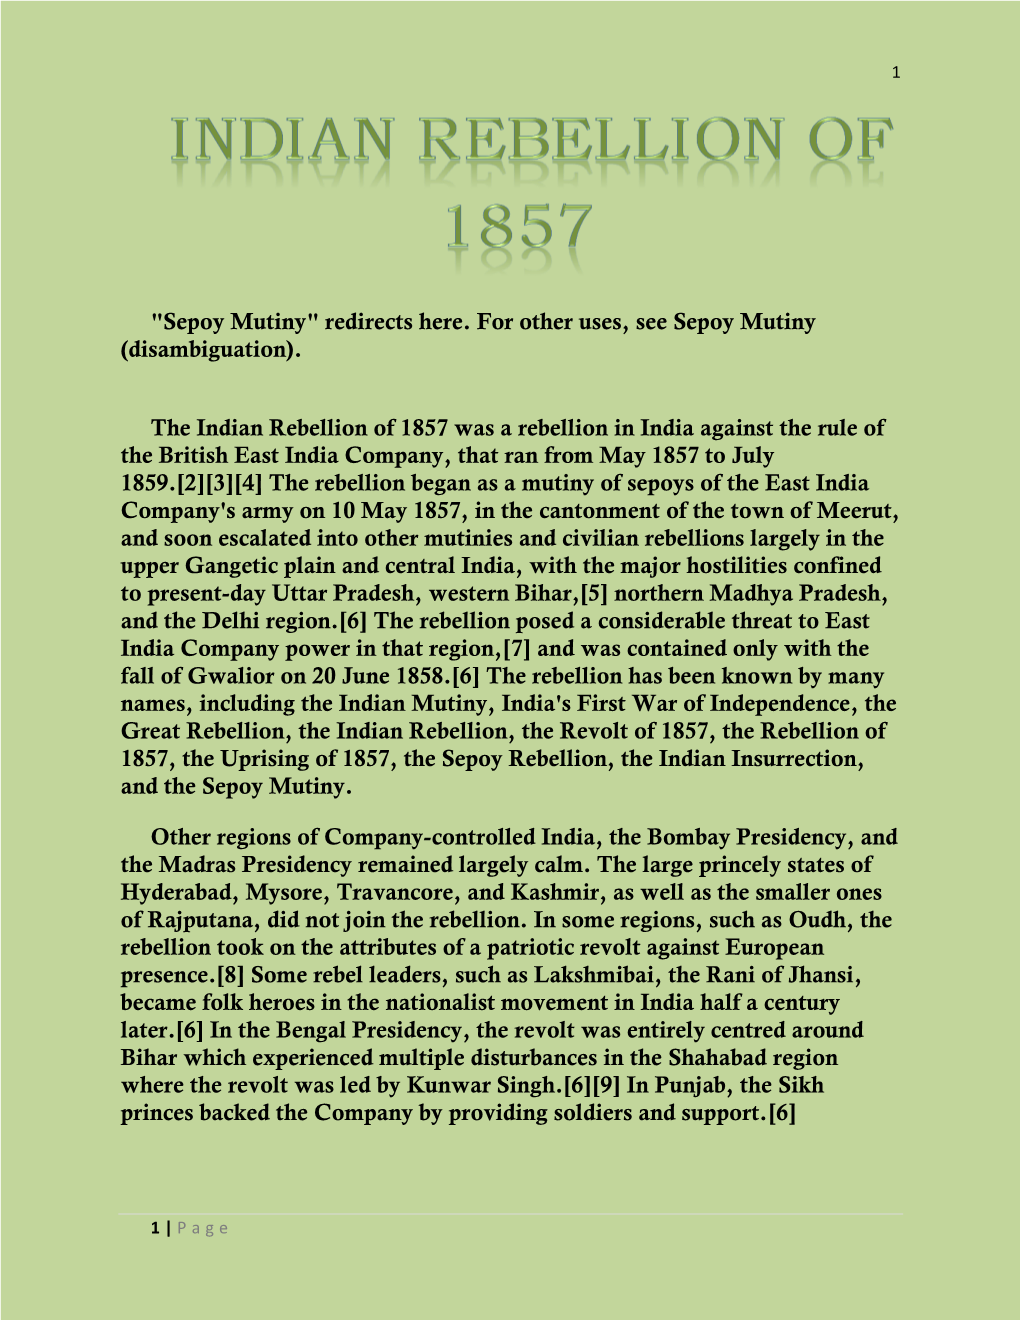 The Indian Rebellion of 1857 Was Ar